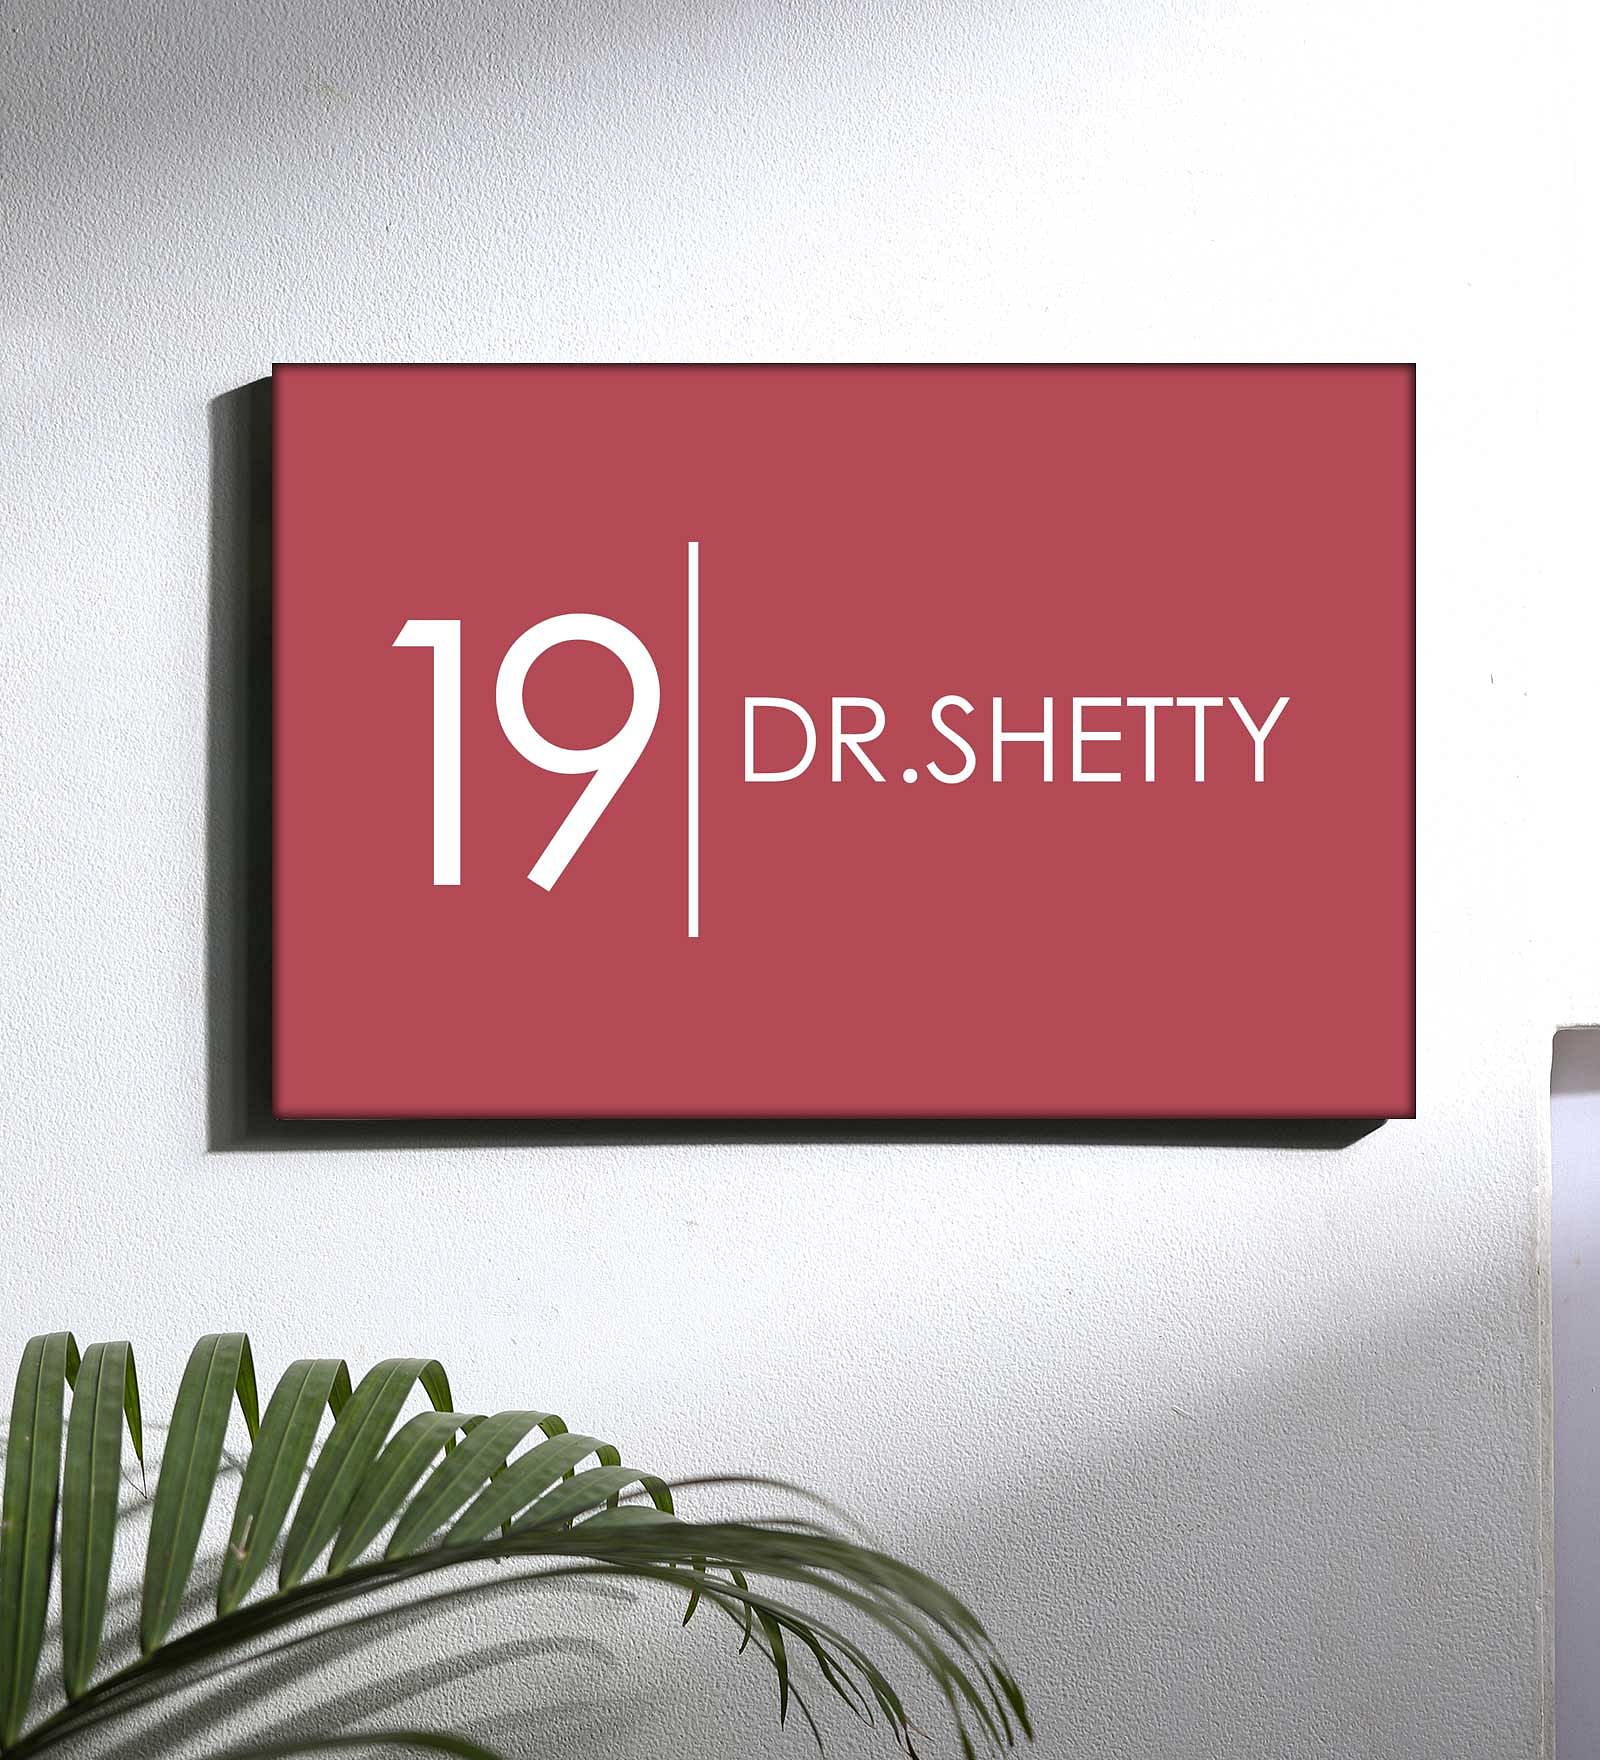 Customized Home Name Board Outdoor - Red Classic Nutcase